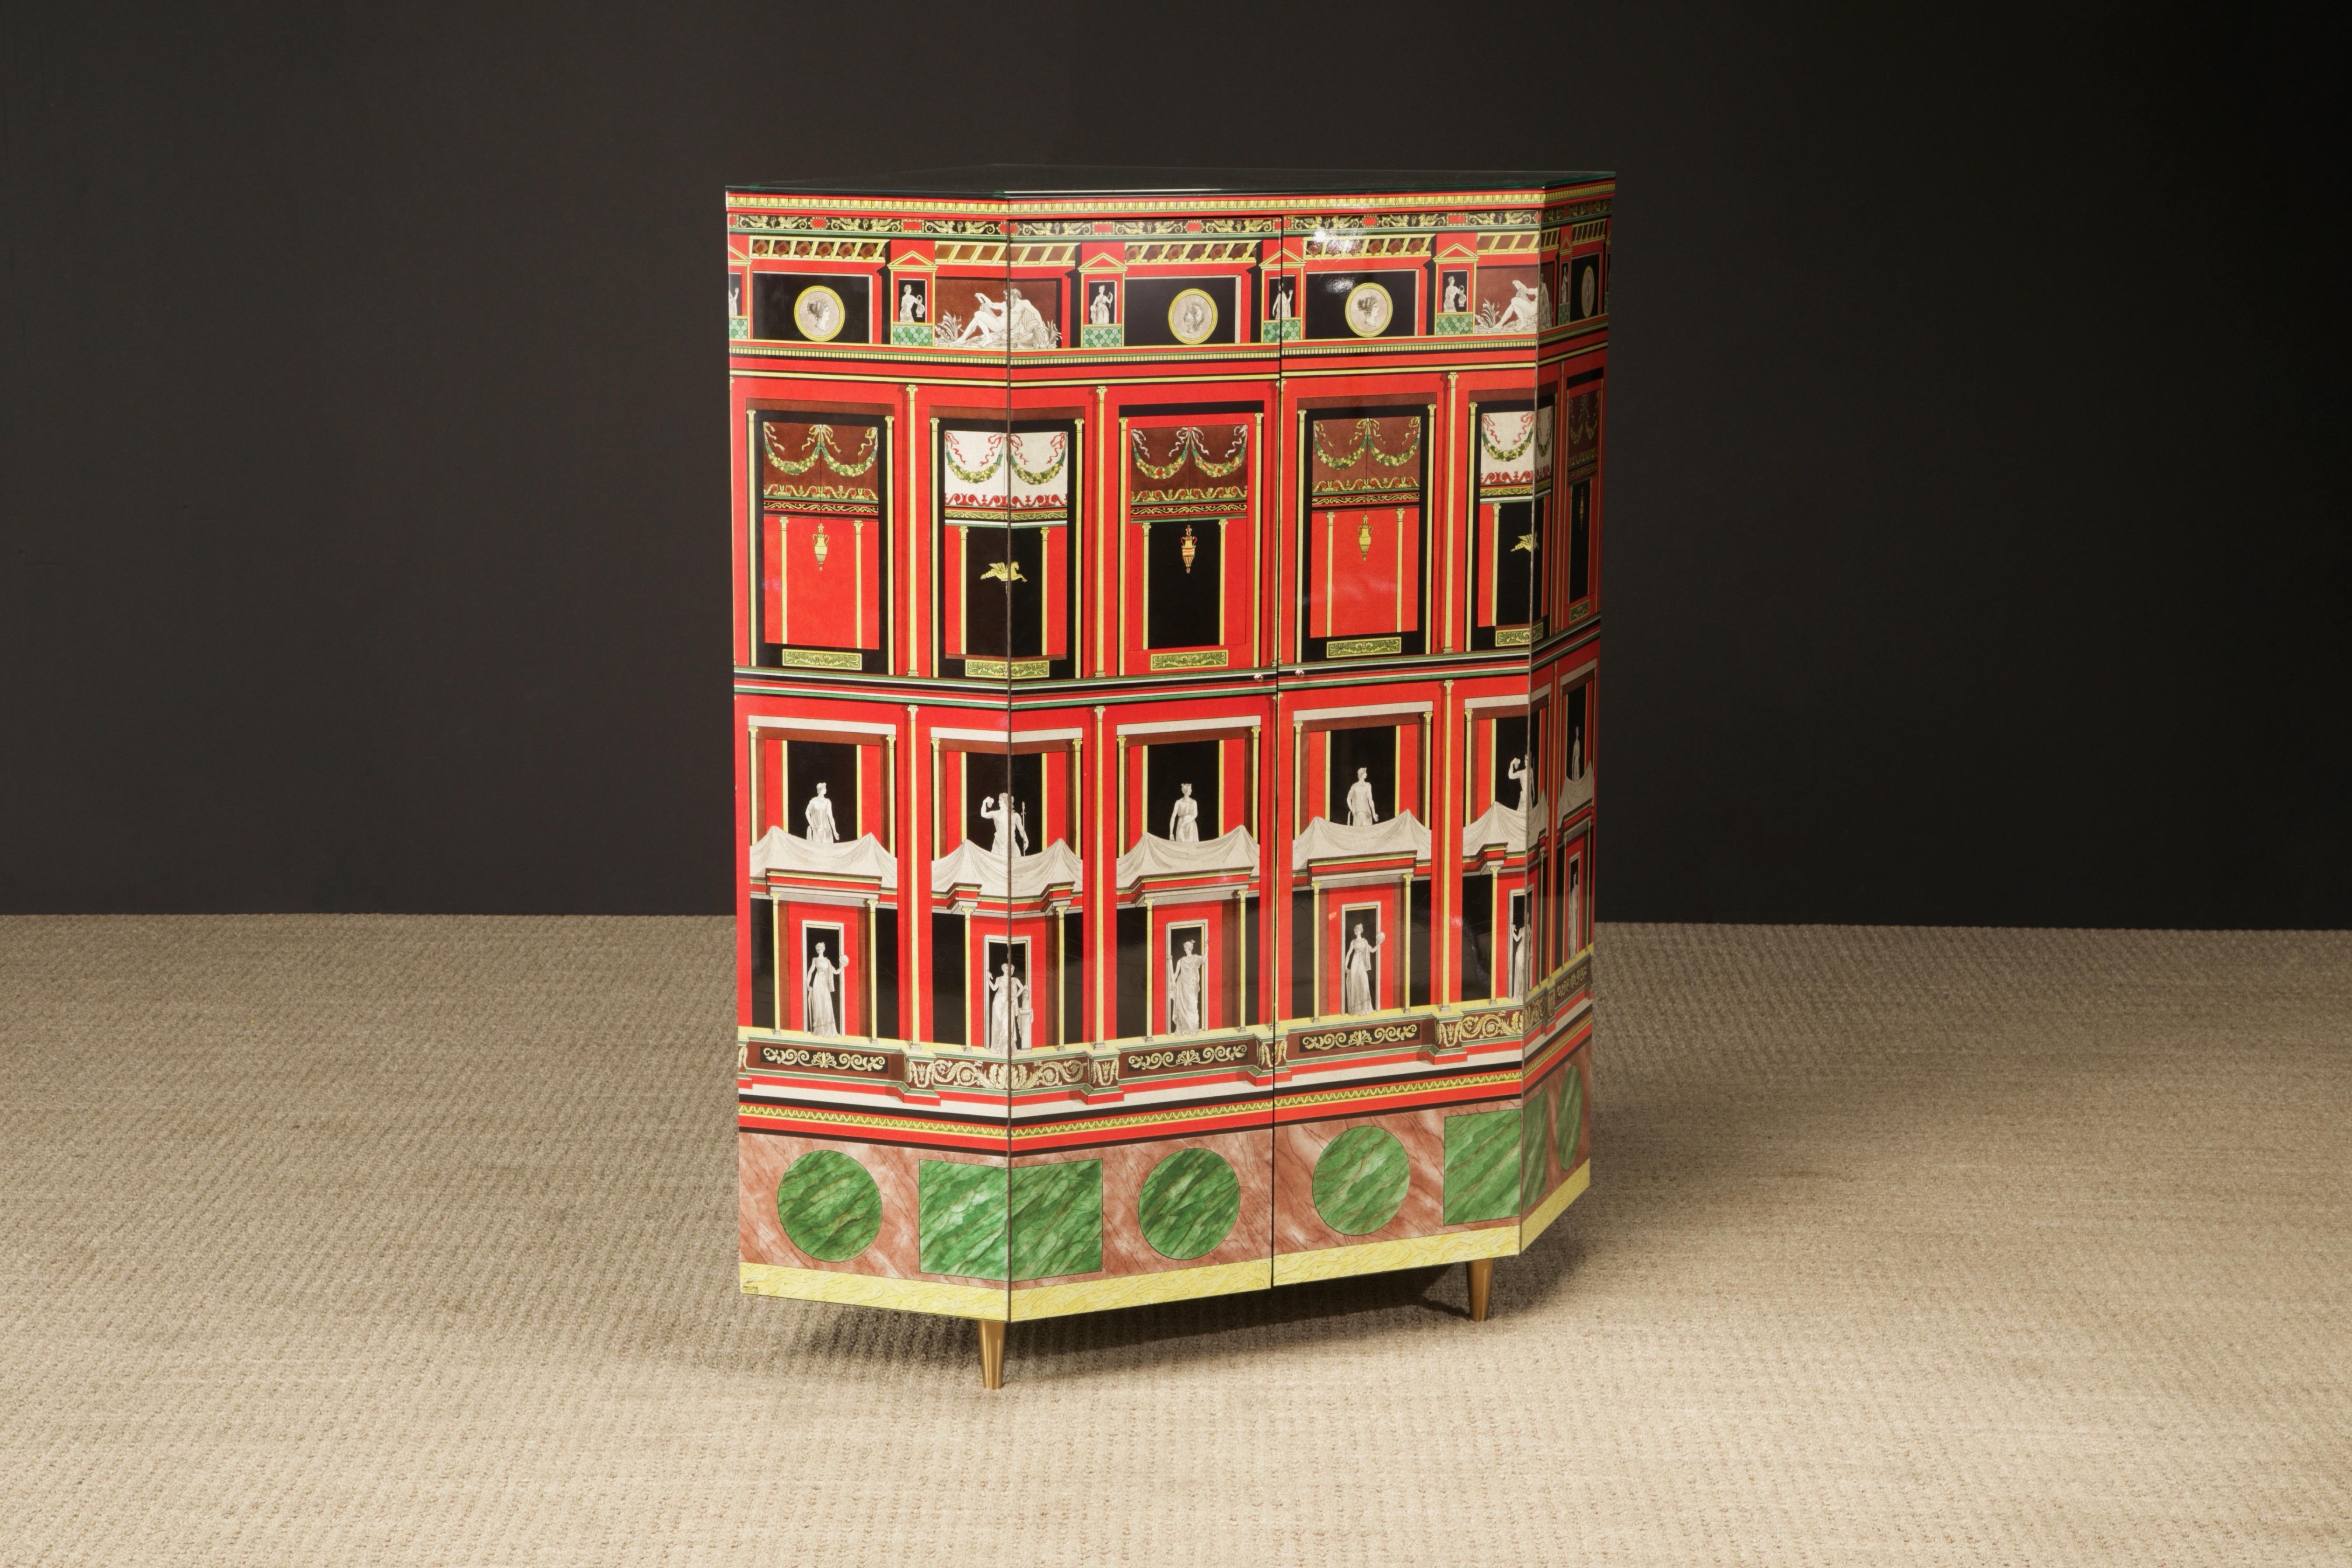 Mid-Century Modern 'Pompeiana' Corner Cabinet by Piero Fornasetti, Italy, 2 of 2 in 1988, Signed  For Sale